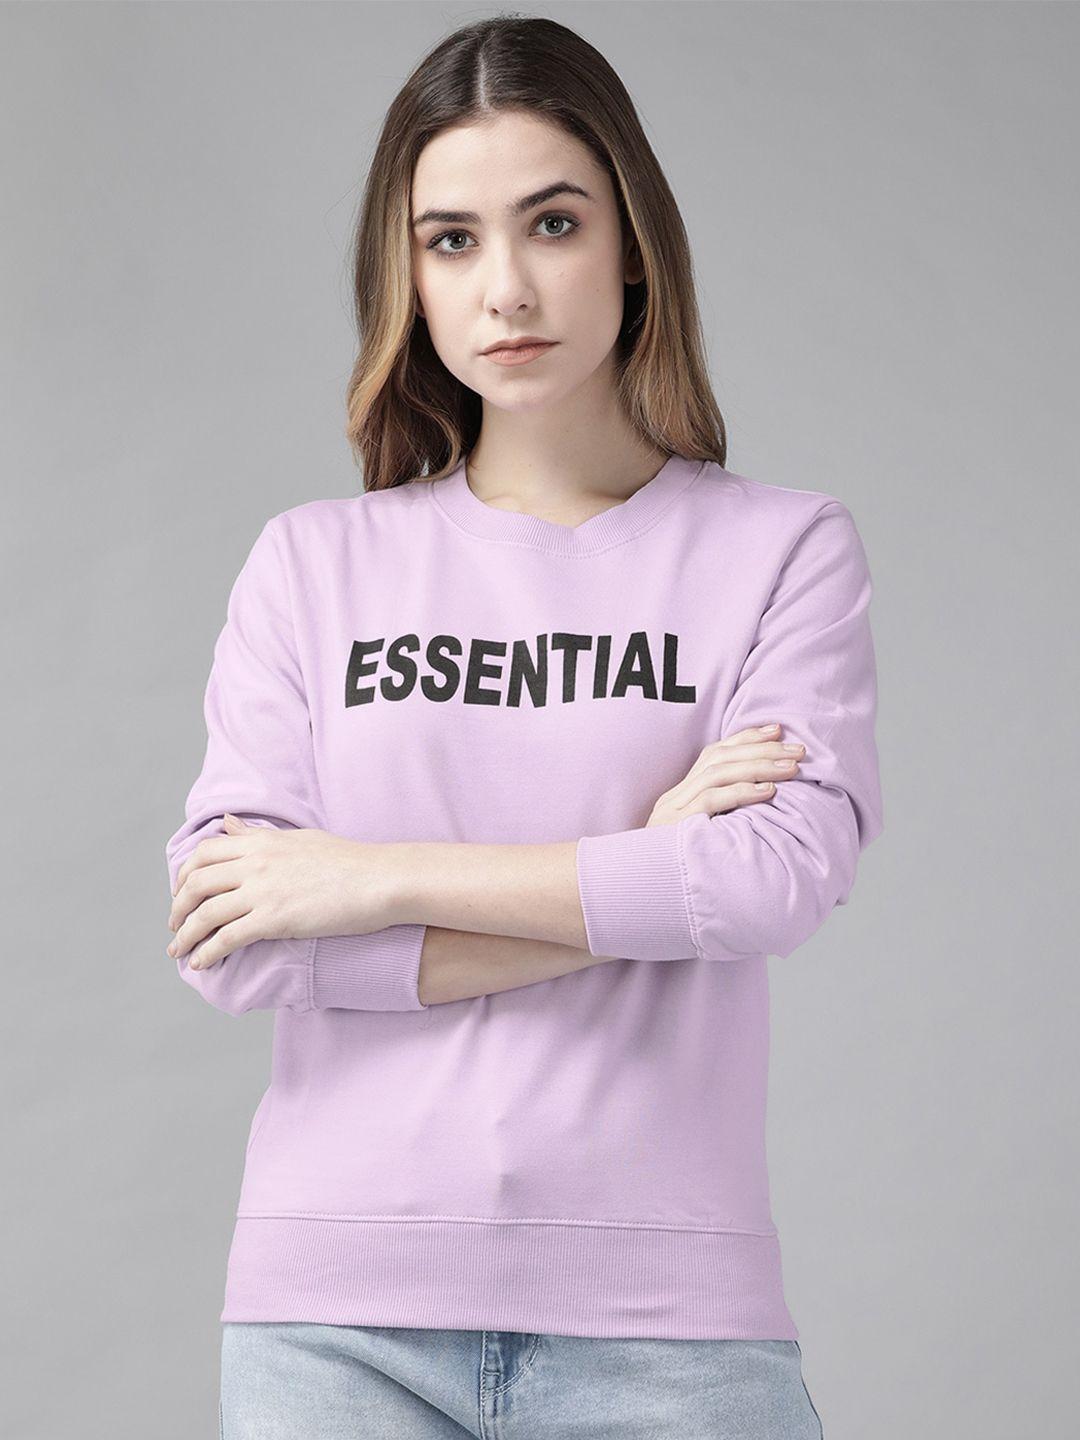 the-dry-state-lavender-typography-printed-round-neck-pullover-sweatshirt